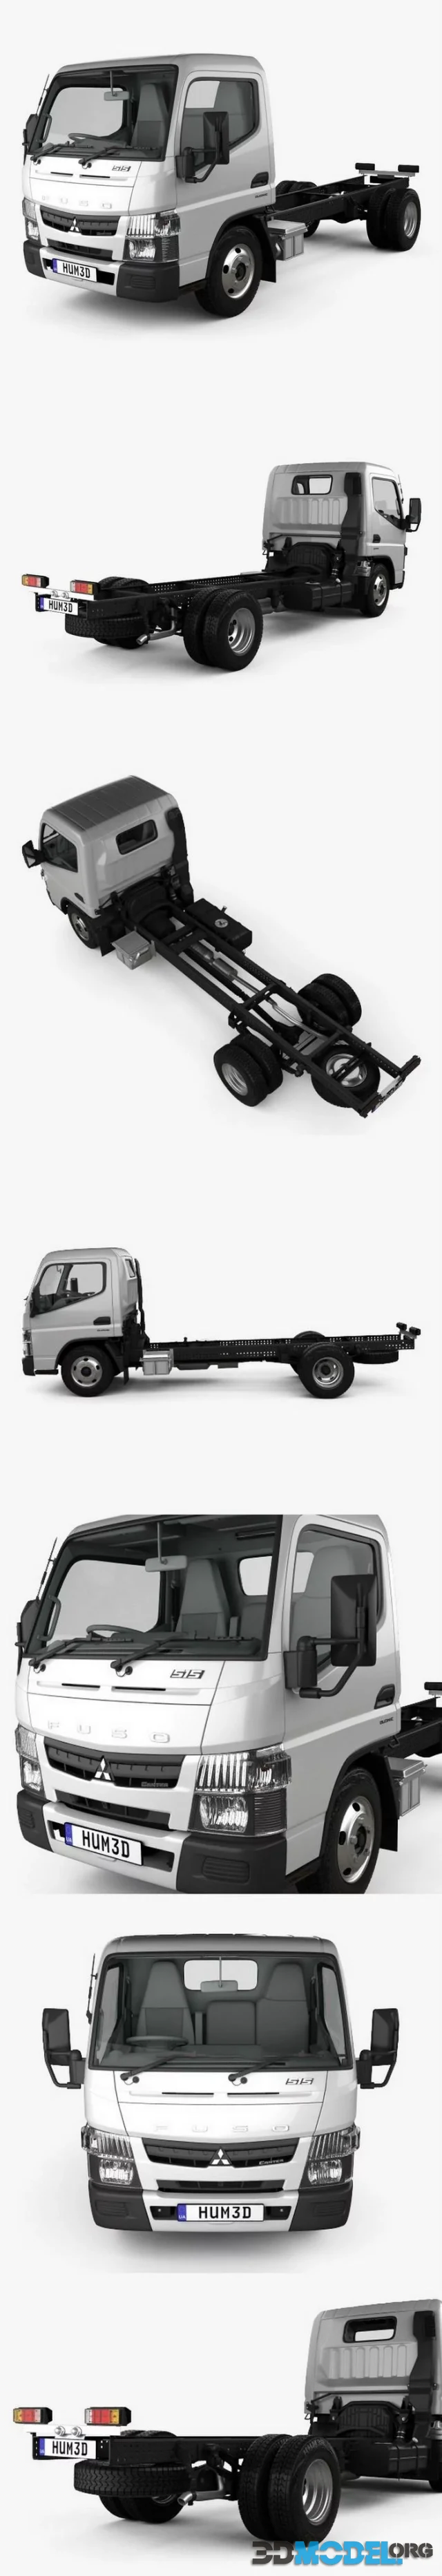 Mitsubishi Fuso Canter Super Low City Cab Chassis Truck with HQ interior 2019